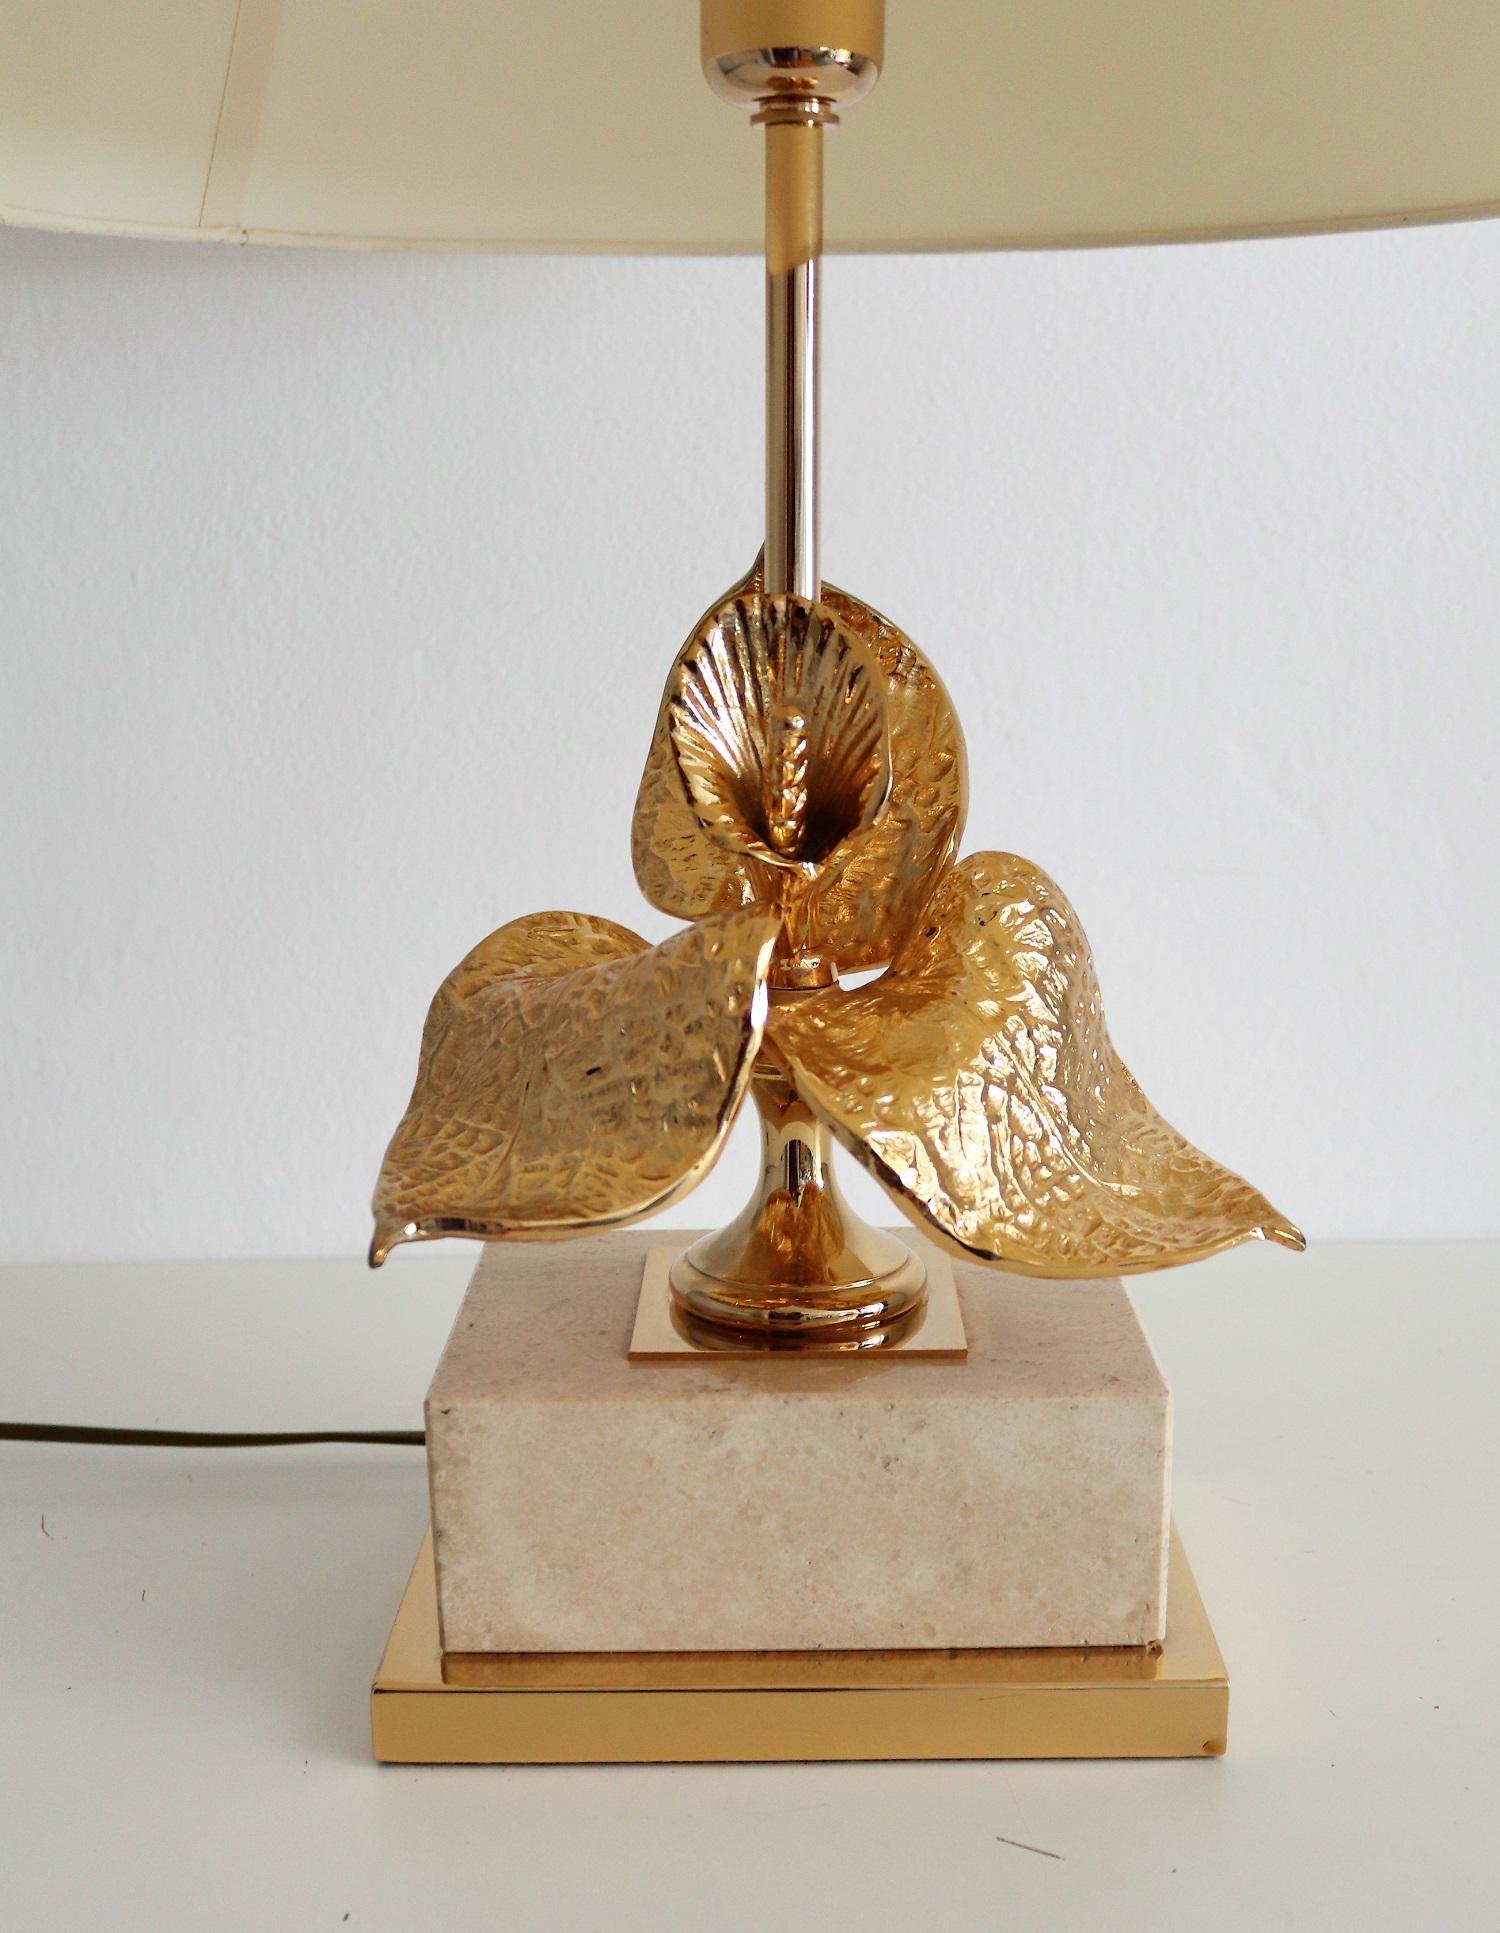 Beautiful table lamp with heavy travertine base and gold plated brass flower.
Made in France attributed to Maison Charles during the 1970s.
The lamp is in nearly excellent original condition with smallest signs of wear and fits still the original